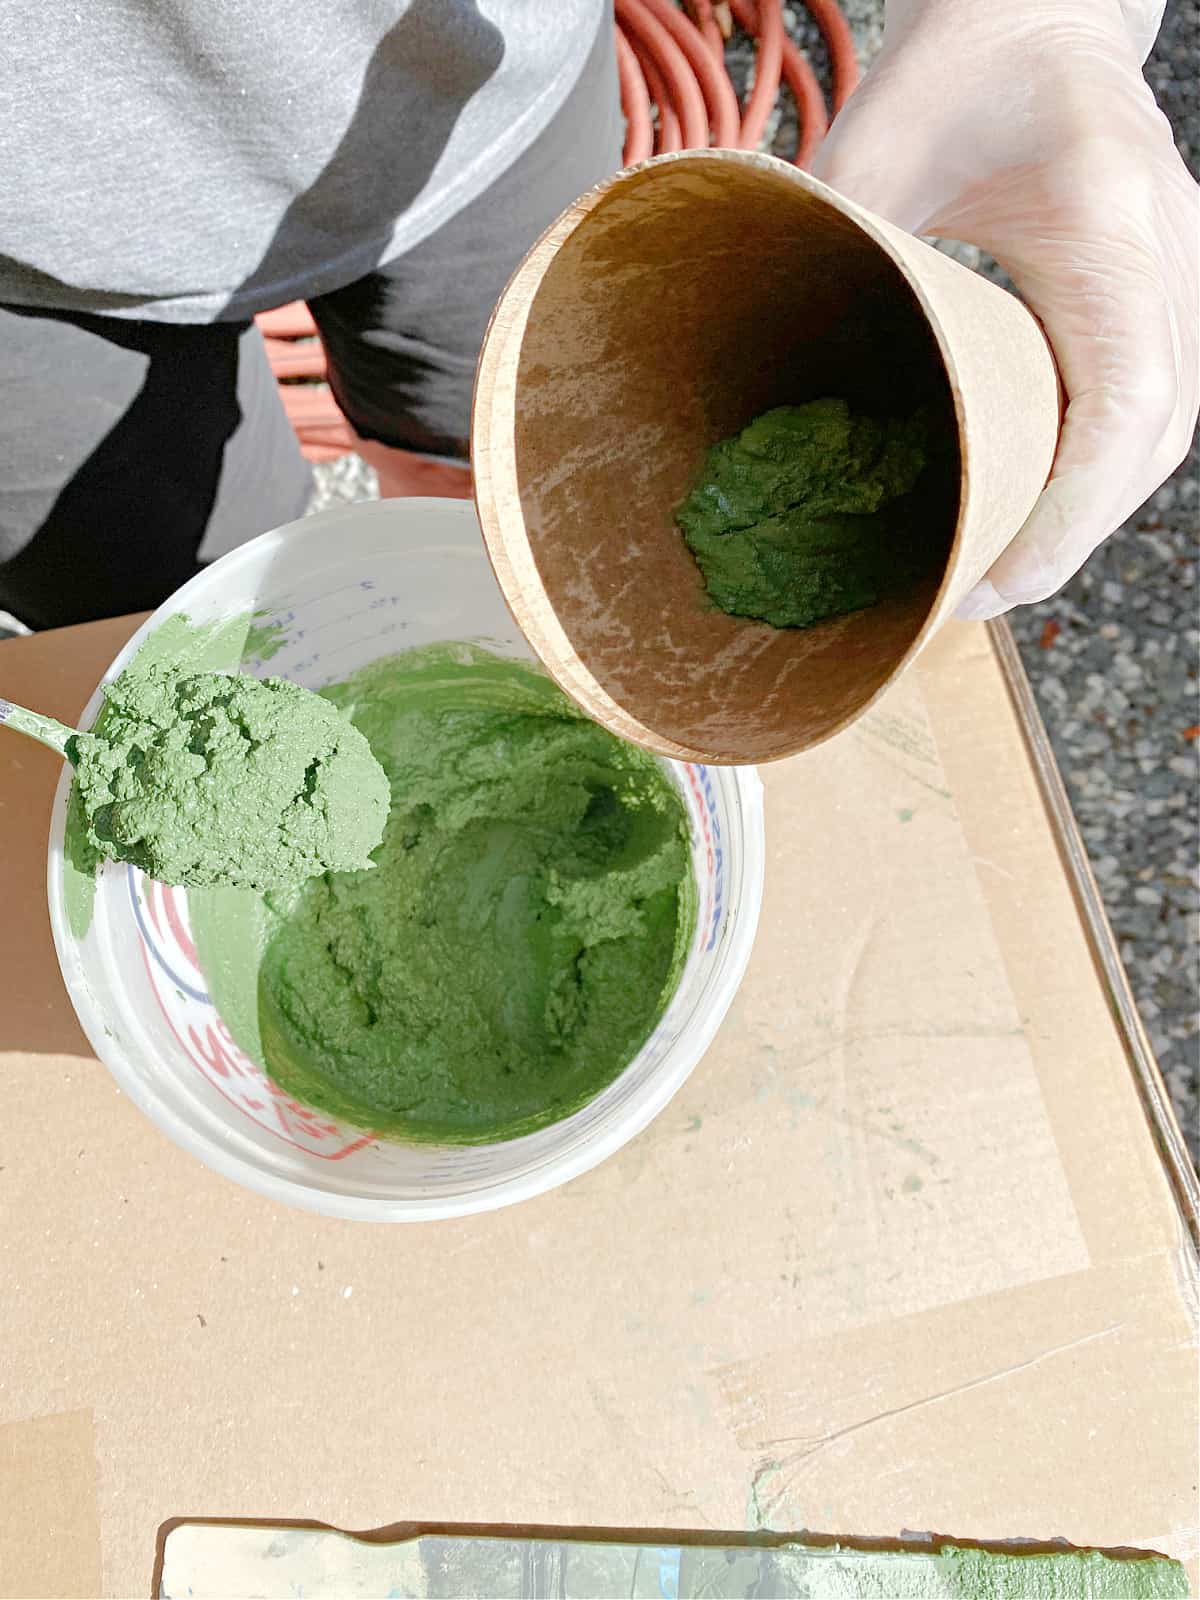 spooning green tinted concrete into cardboard cone